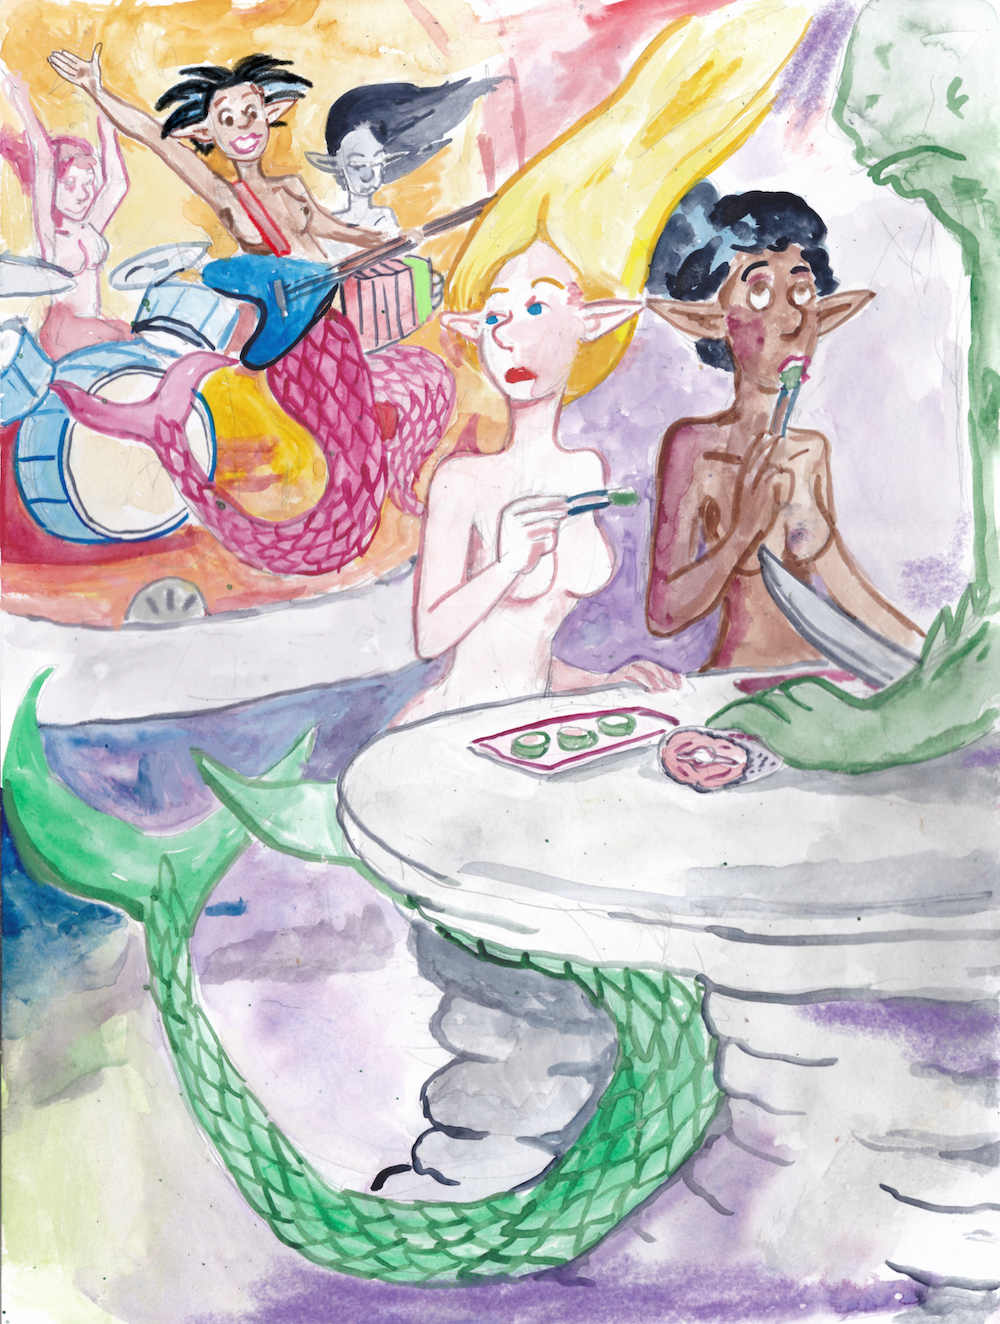 Mermay mermaids music sushi restaurant rock and roll drums electric guitar accordion performance  illustration watercolor